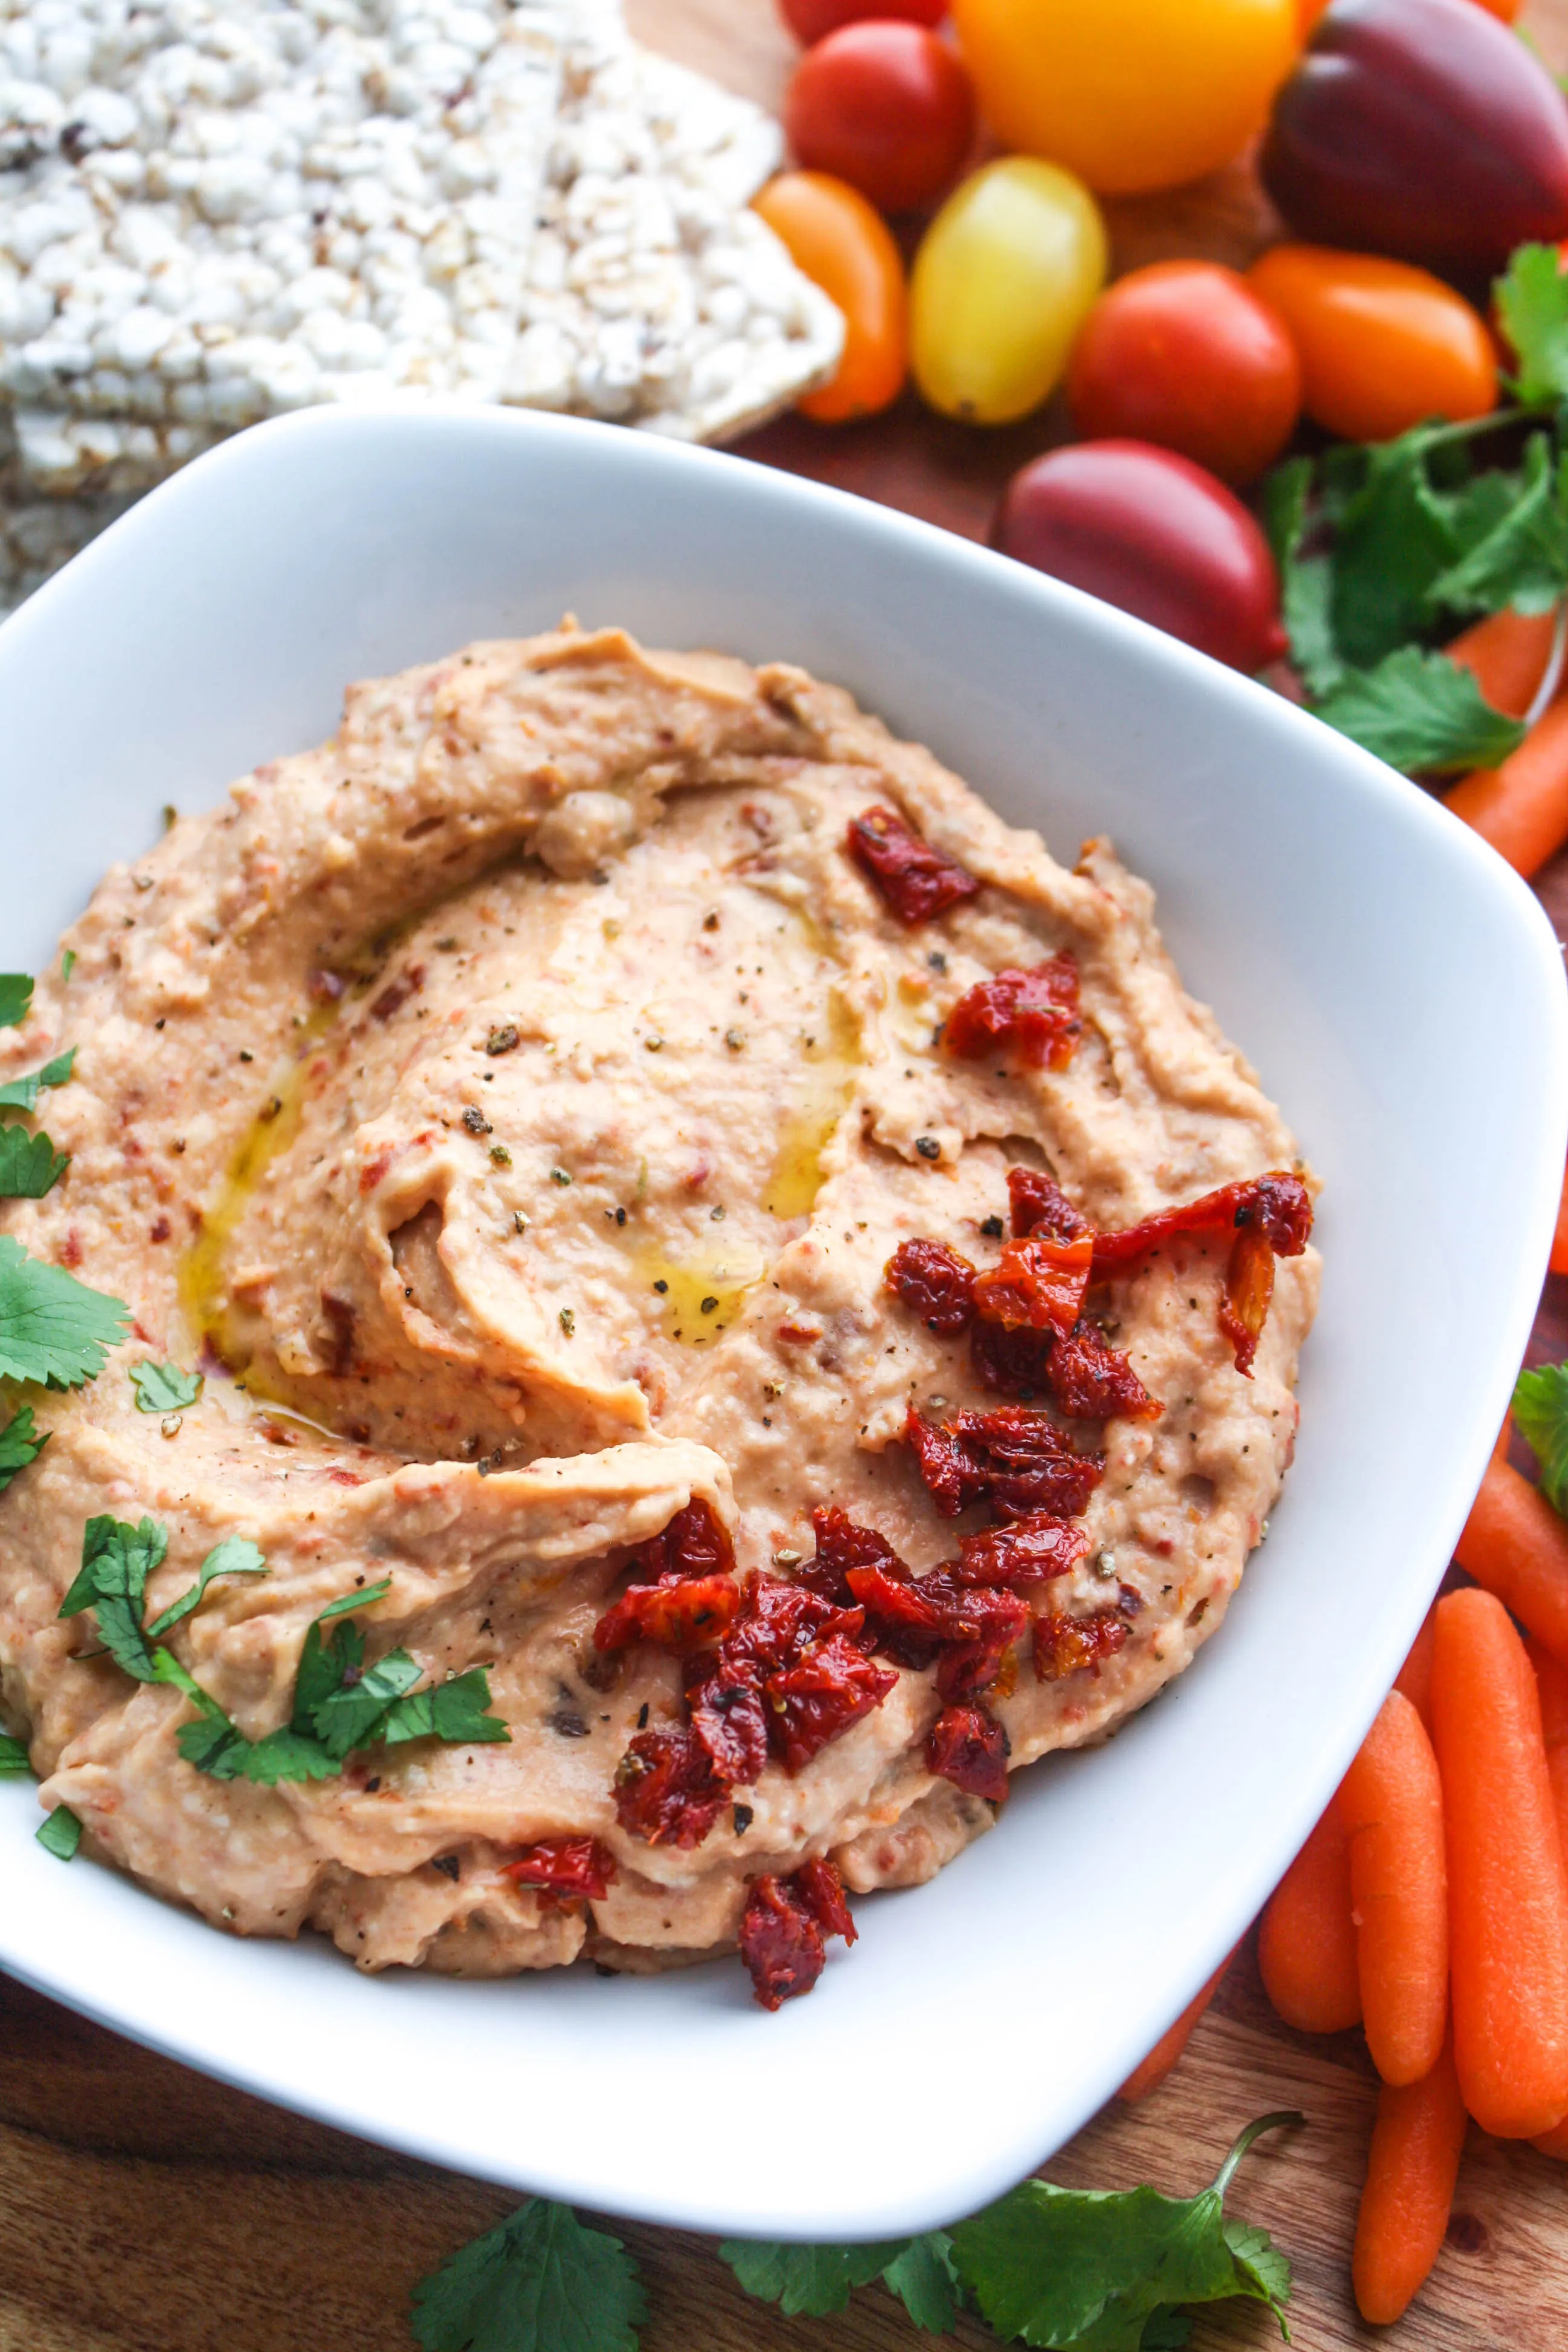 Roasted Garlic and Sun-Dried Tomato Hummus is a fabulous snacking option. You'll love this hummus with roasted garlic and sun-dried tomatoes.